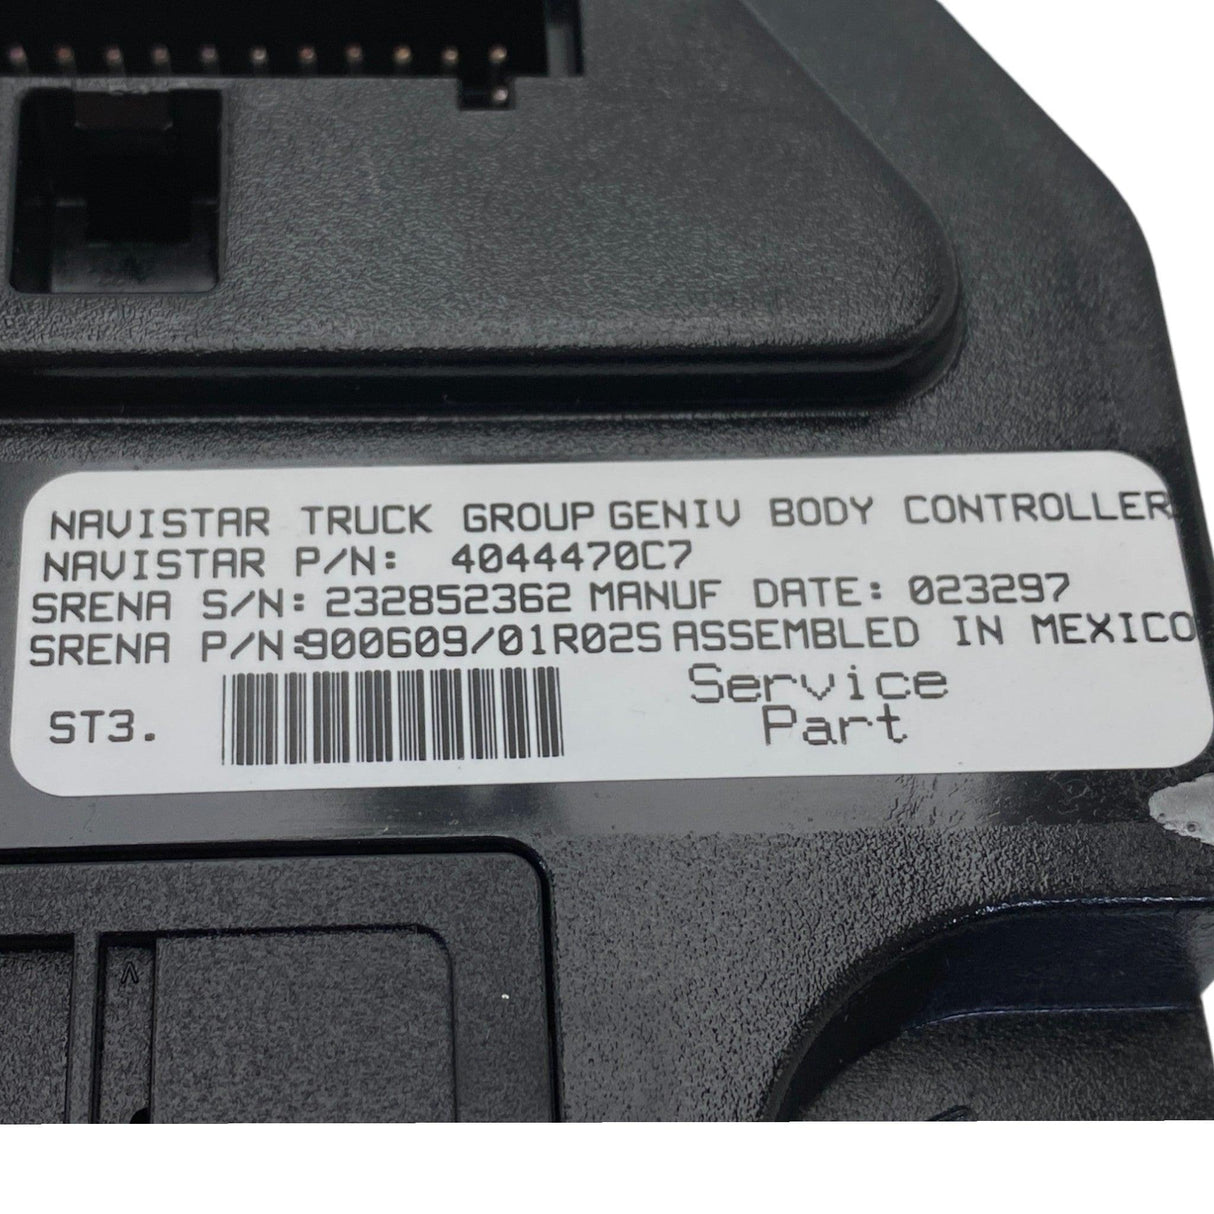 4044470C7 Genuine International Electronic Body Controller - Truck To Trailer